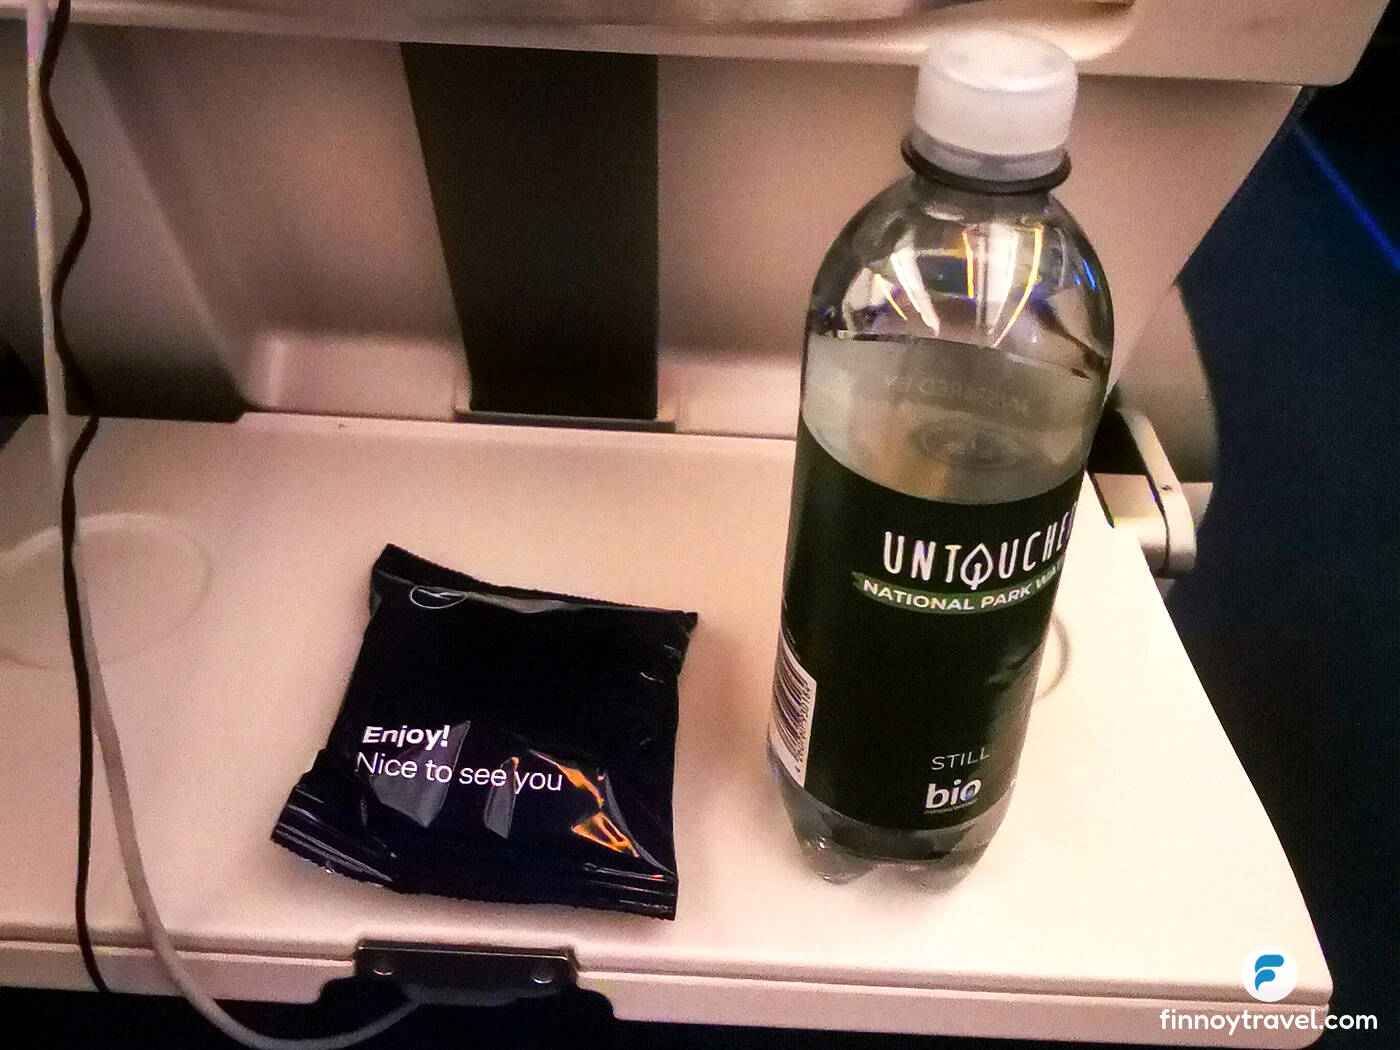 crackers and water bottle provided by Lufthansa